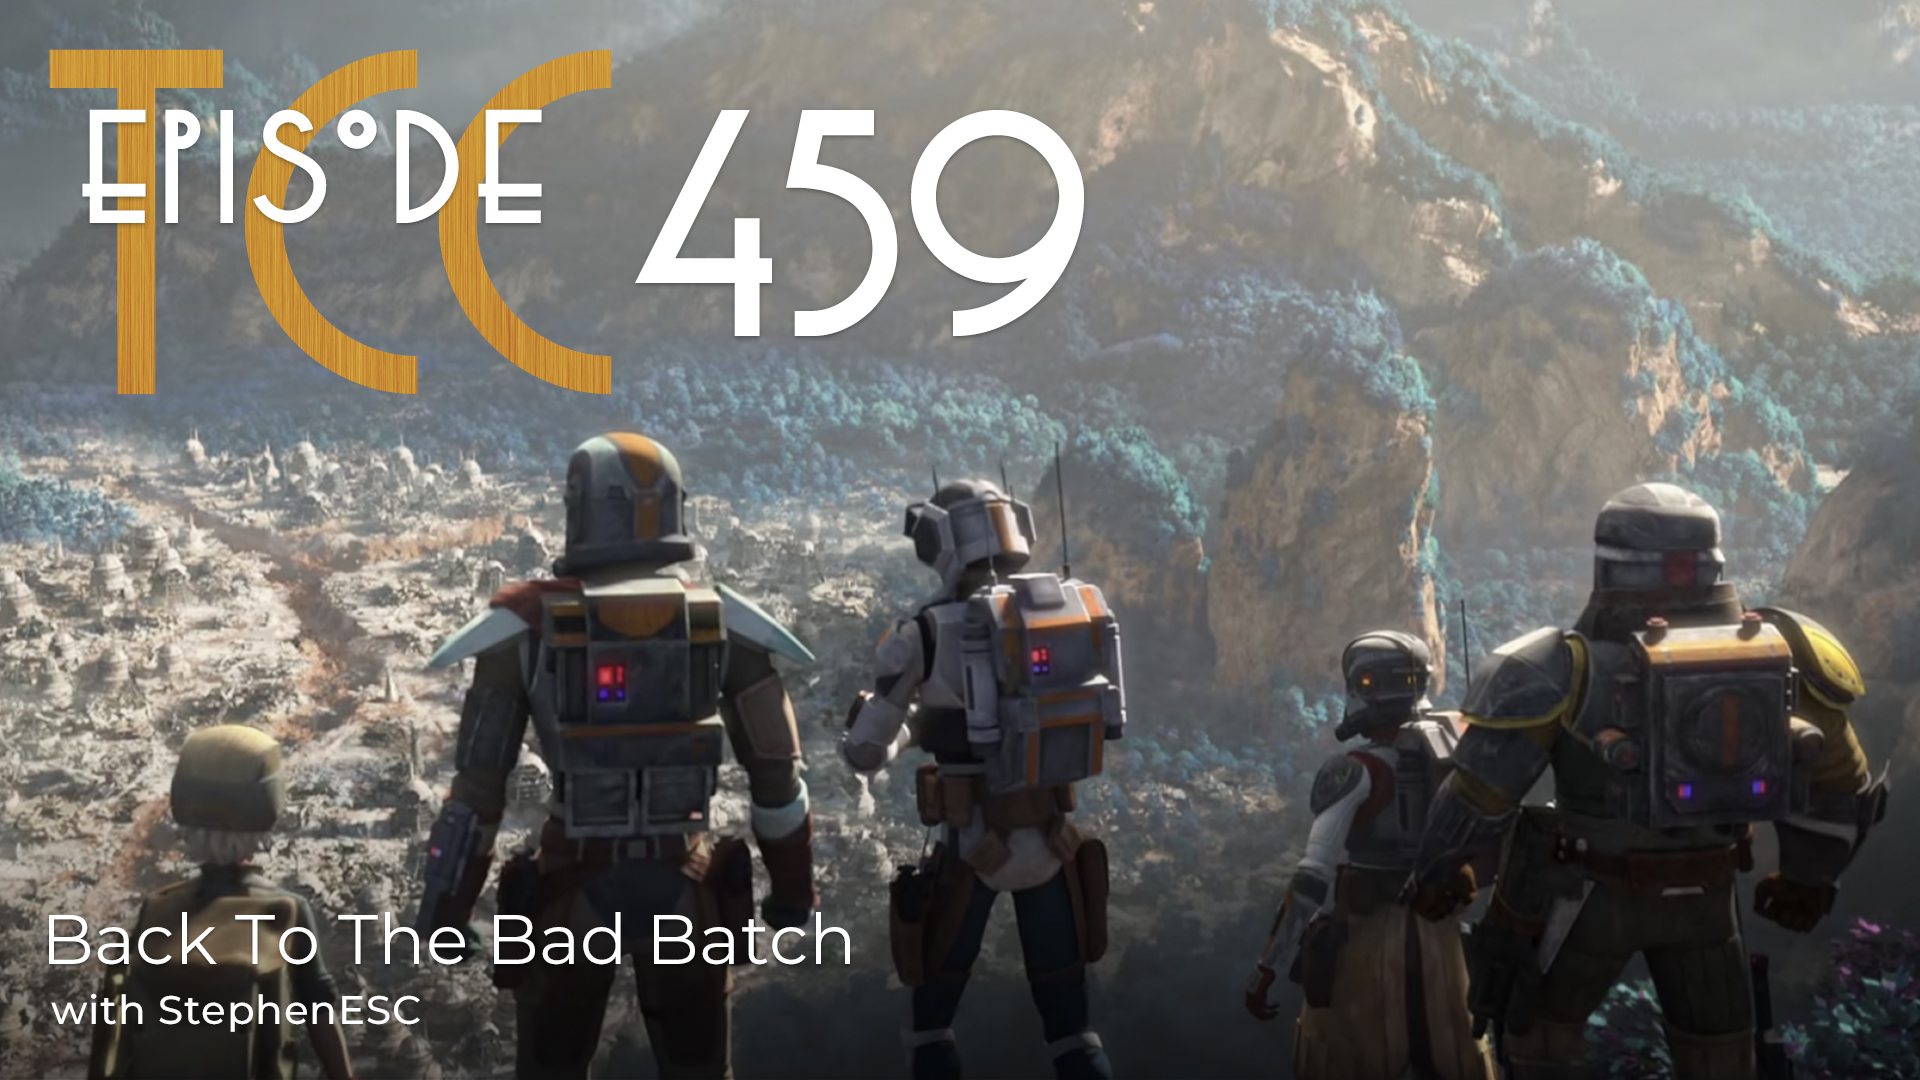 The Citadel Cafe: Back To The Bad Batch